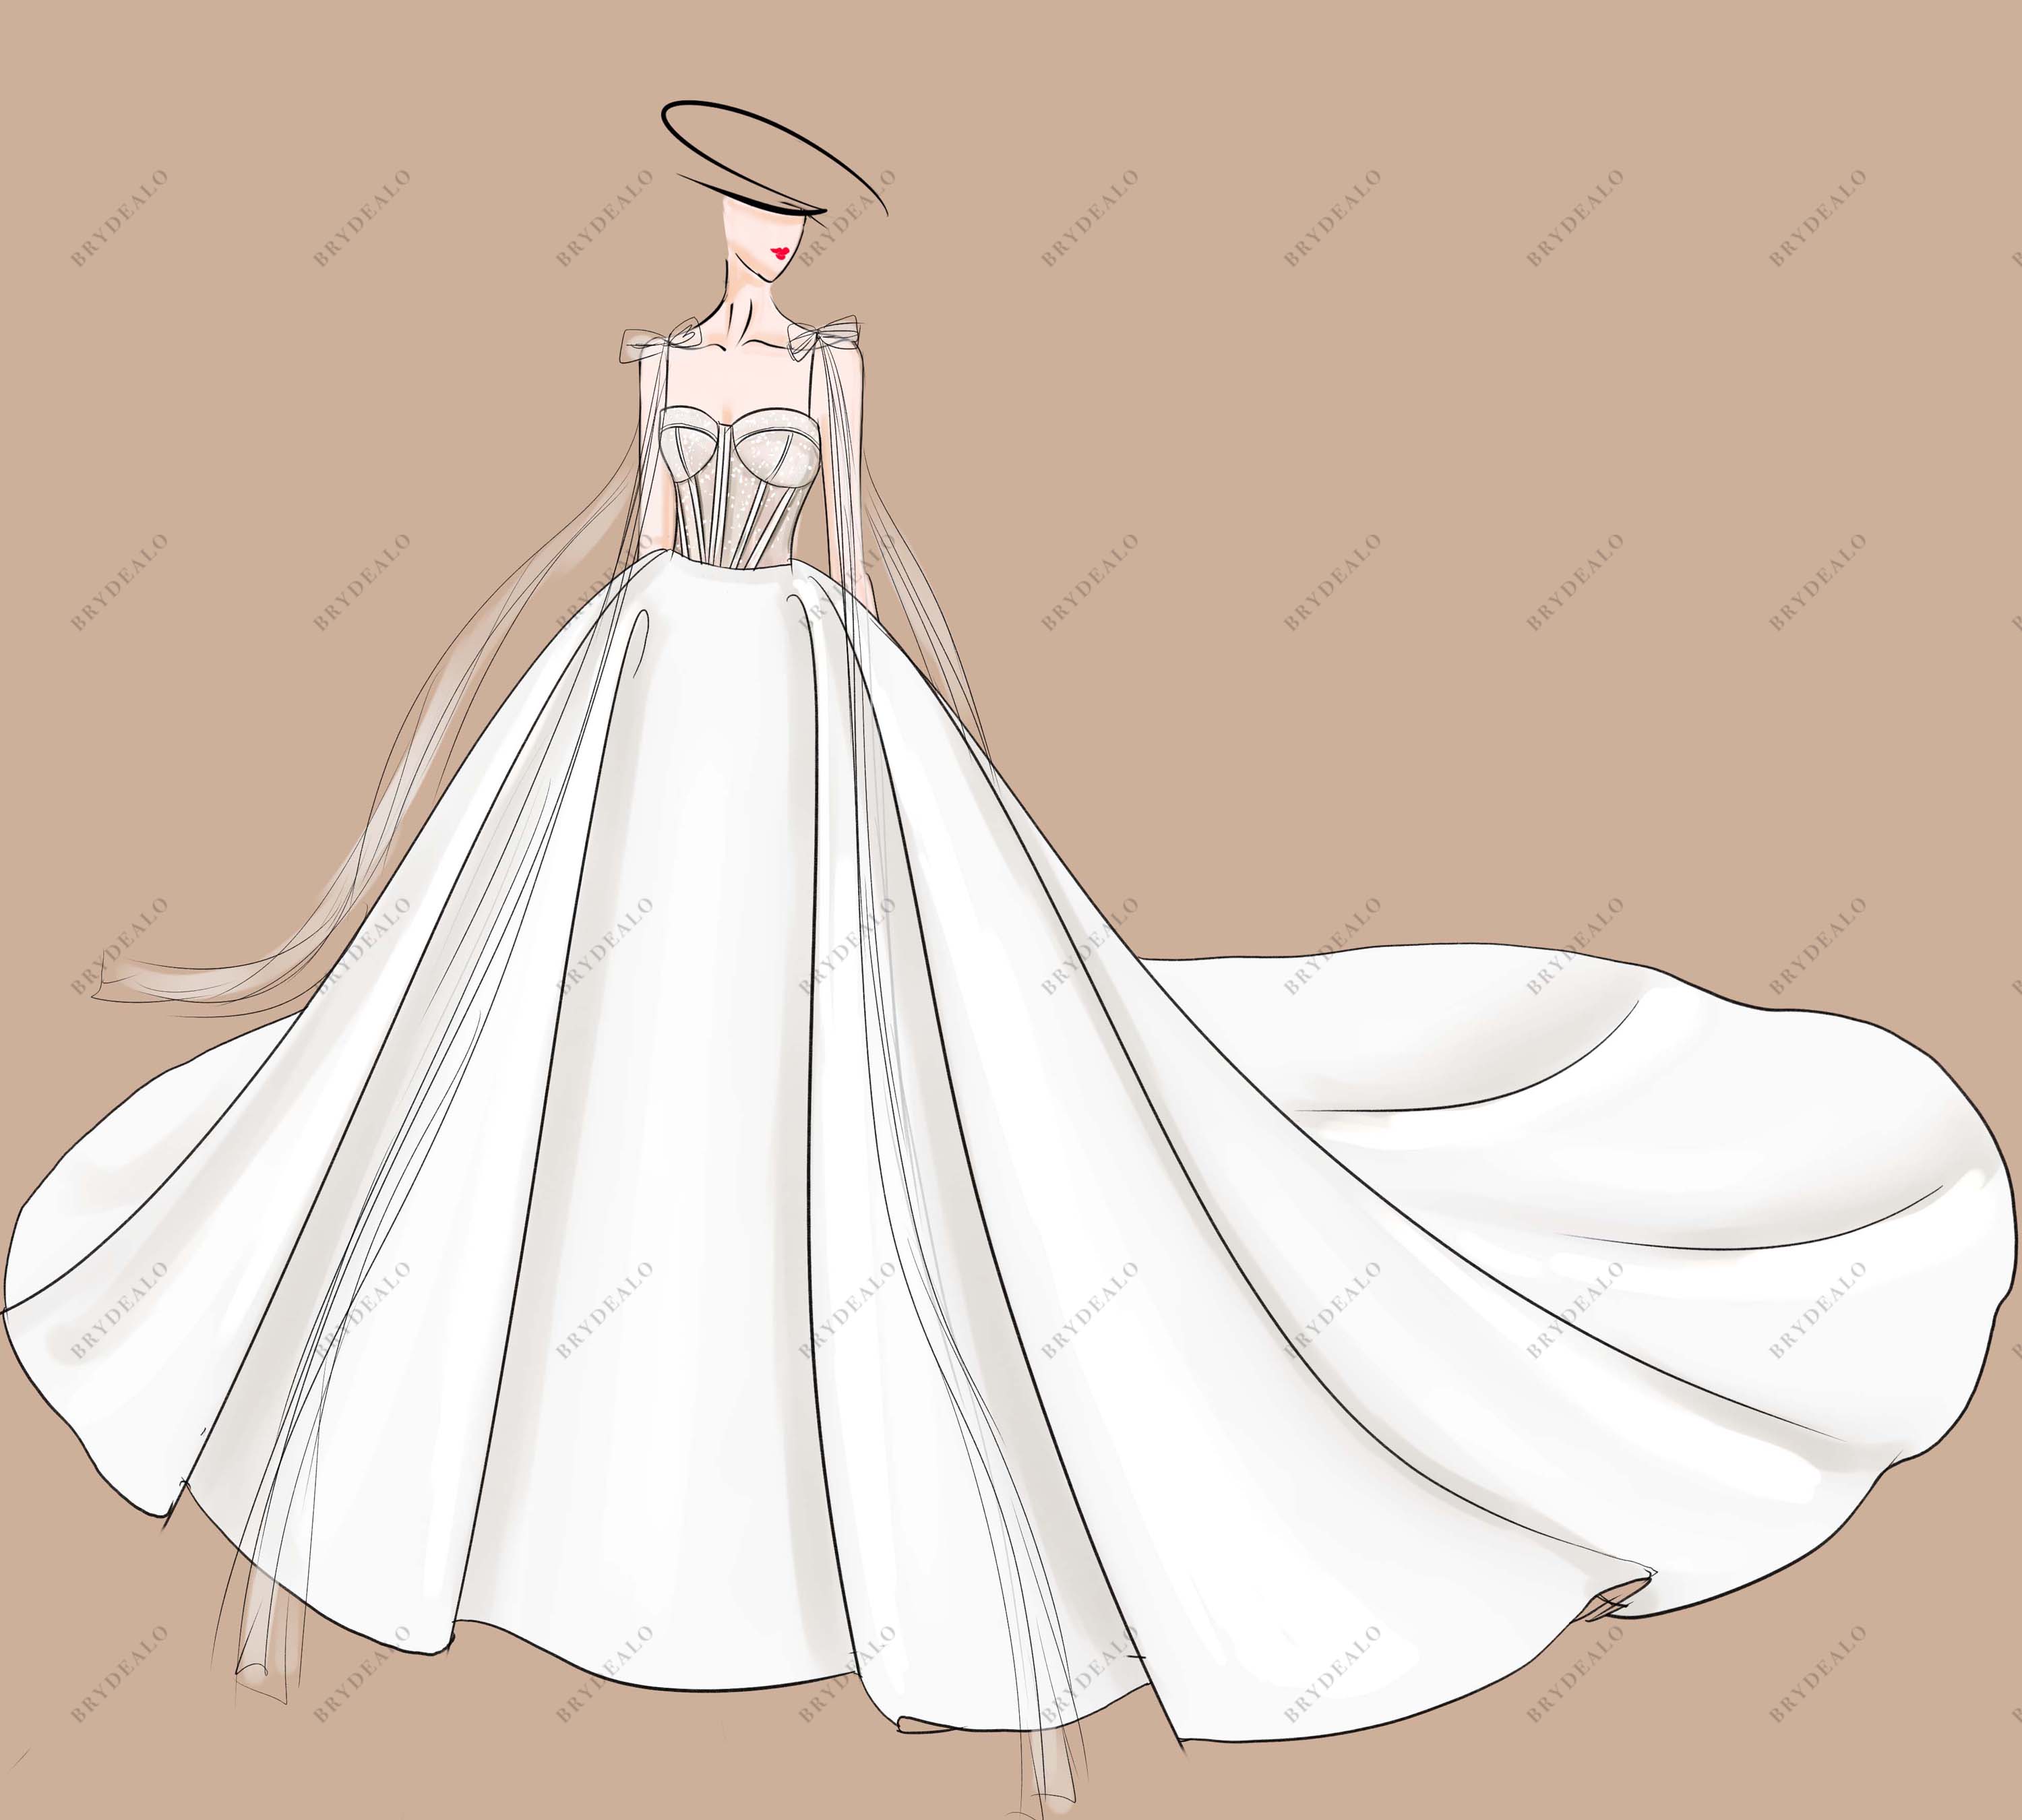 Ball Gown Drawing - Etsy